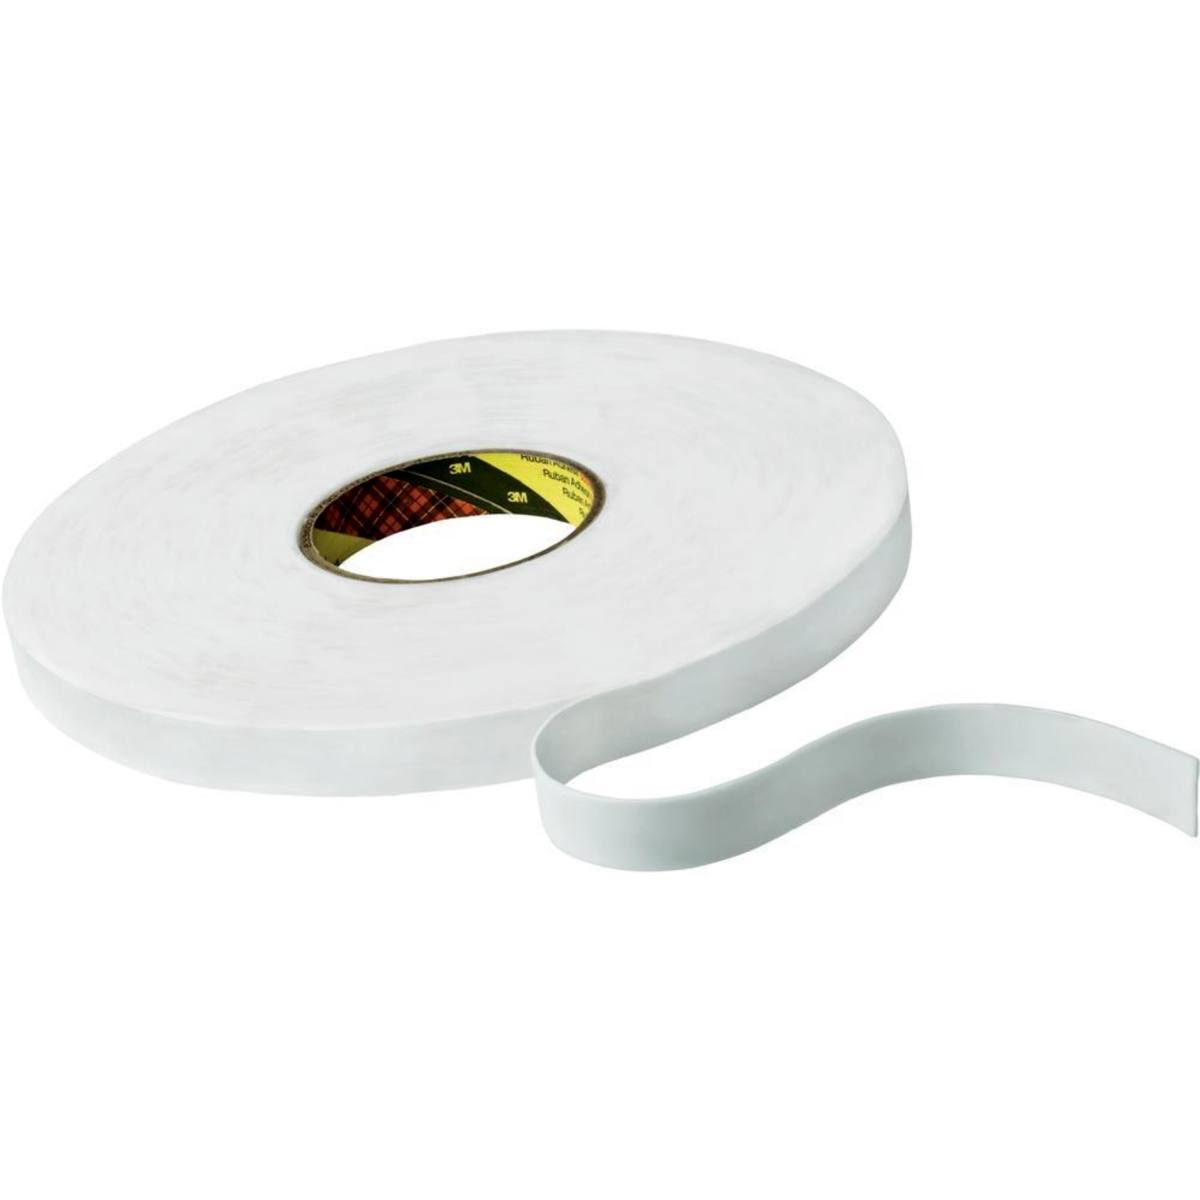 3M PE foam adhesive tape with acrylic adhesive 9546, white, 19 mm x 66 m, 1.1 mm